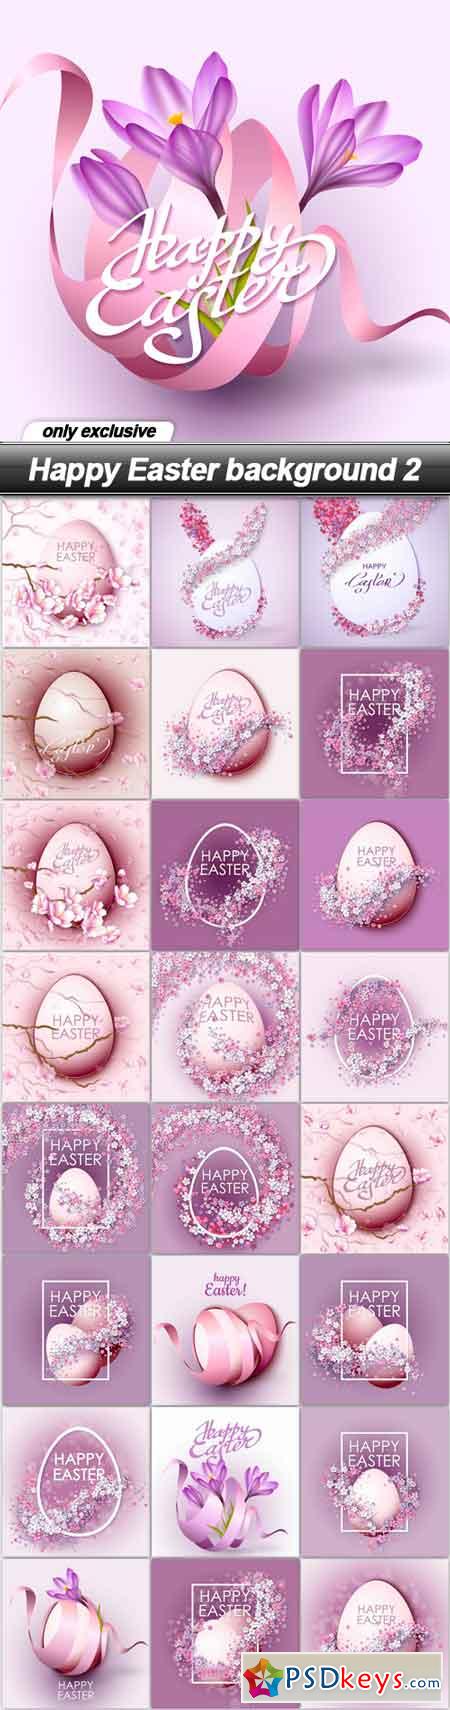 Happy Easter background 2 - 25 EPS